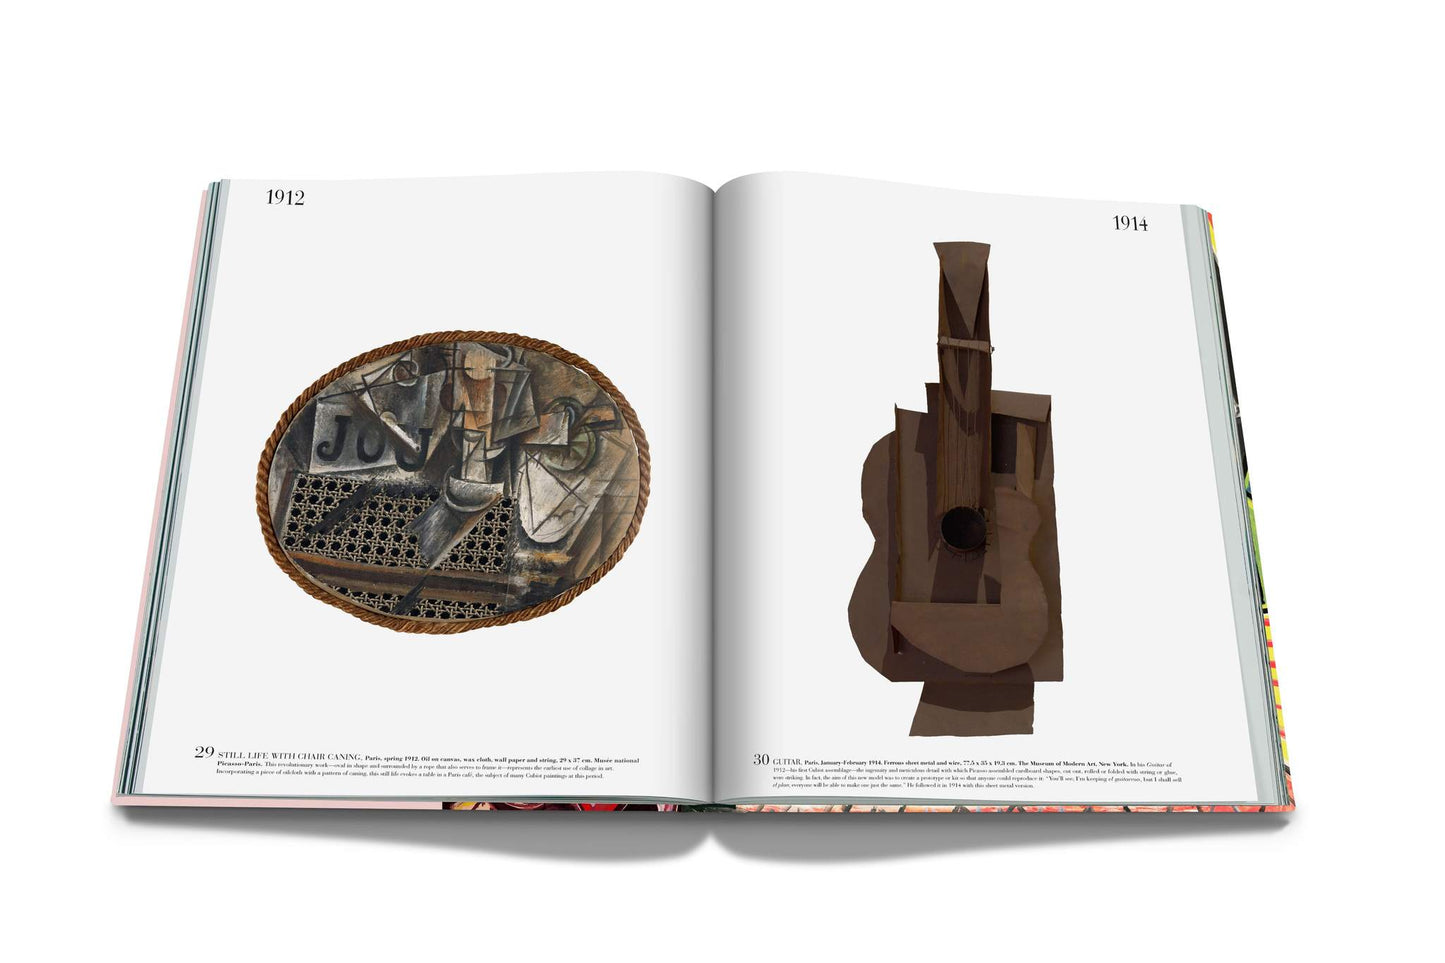 Book Pablo Picasso: Impossible collection